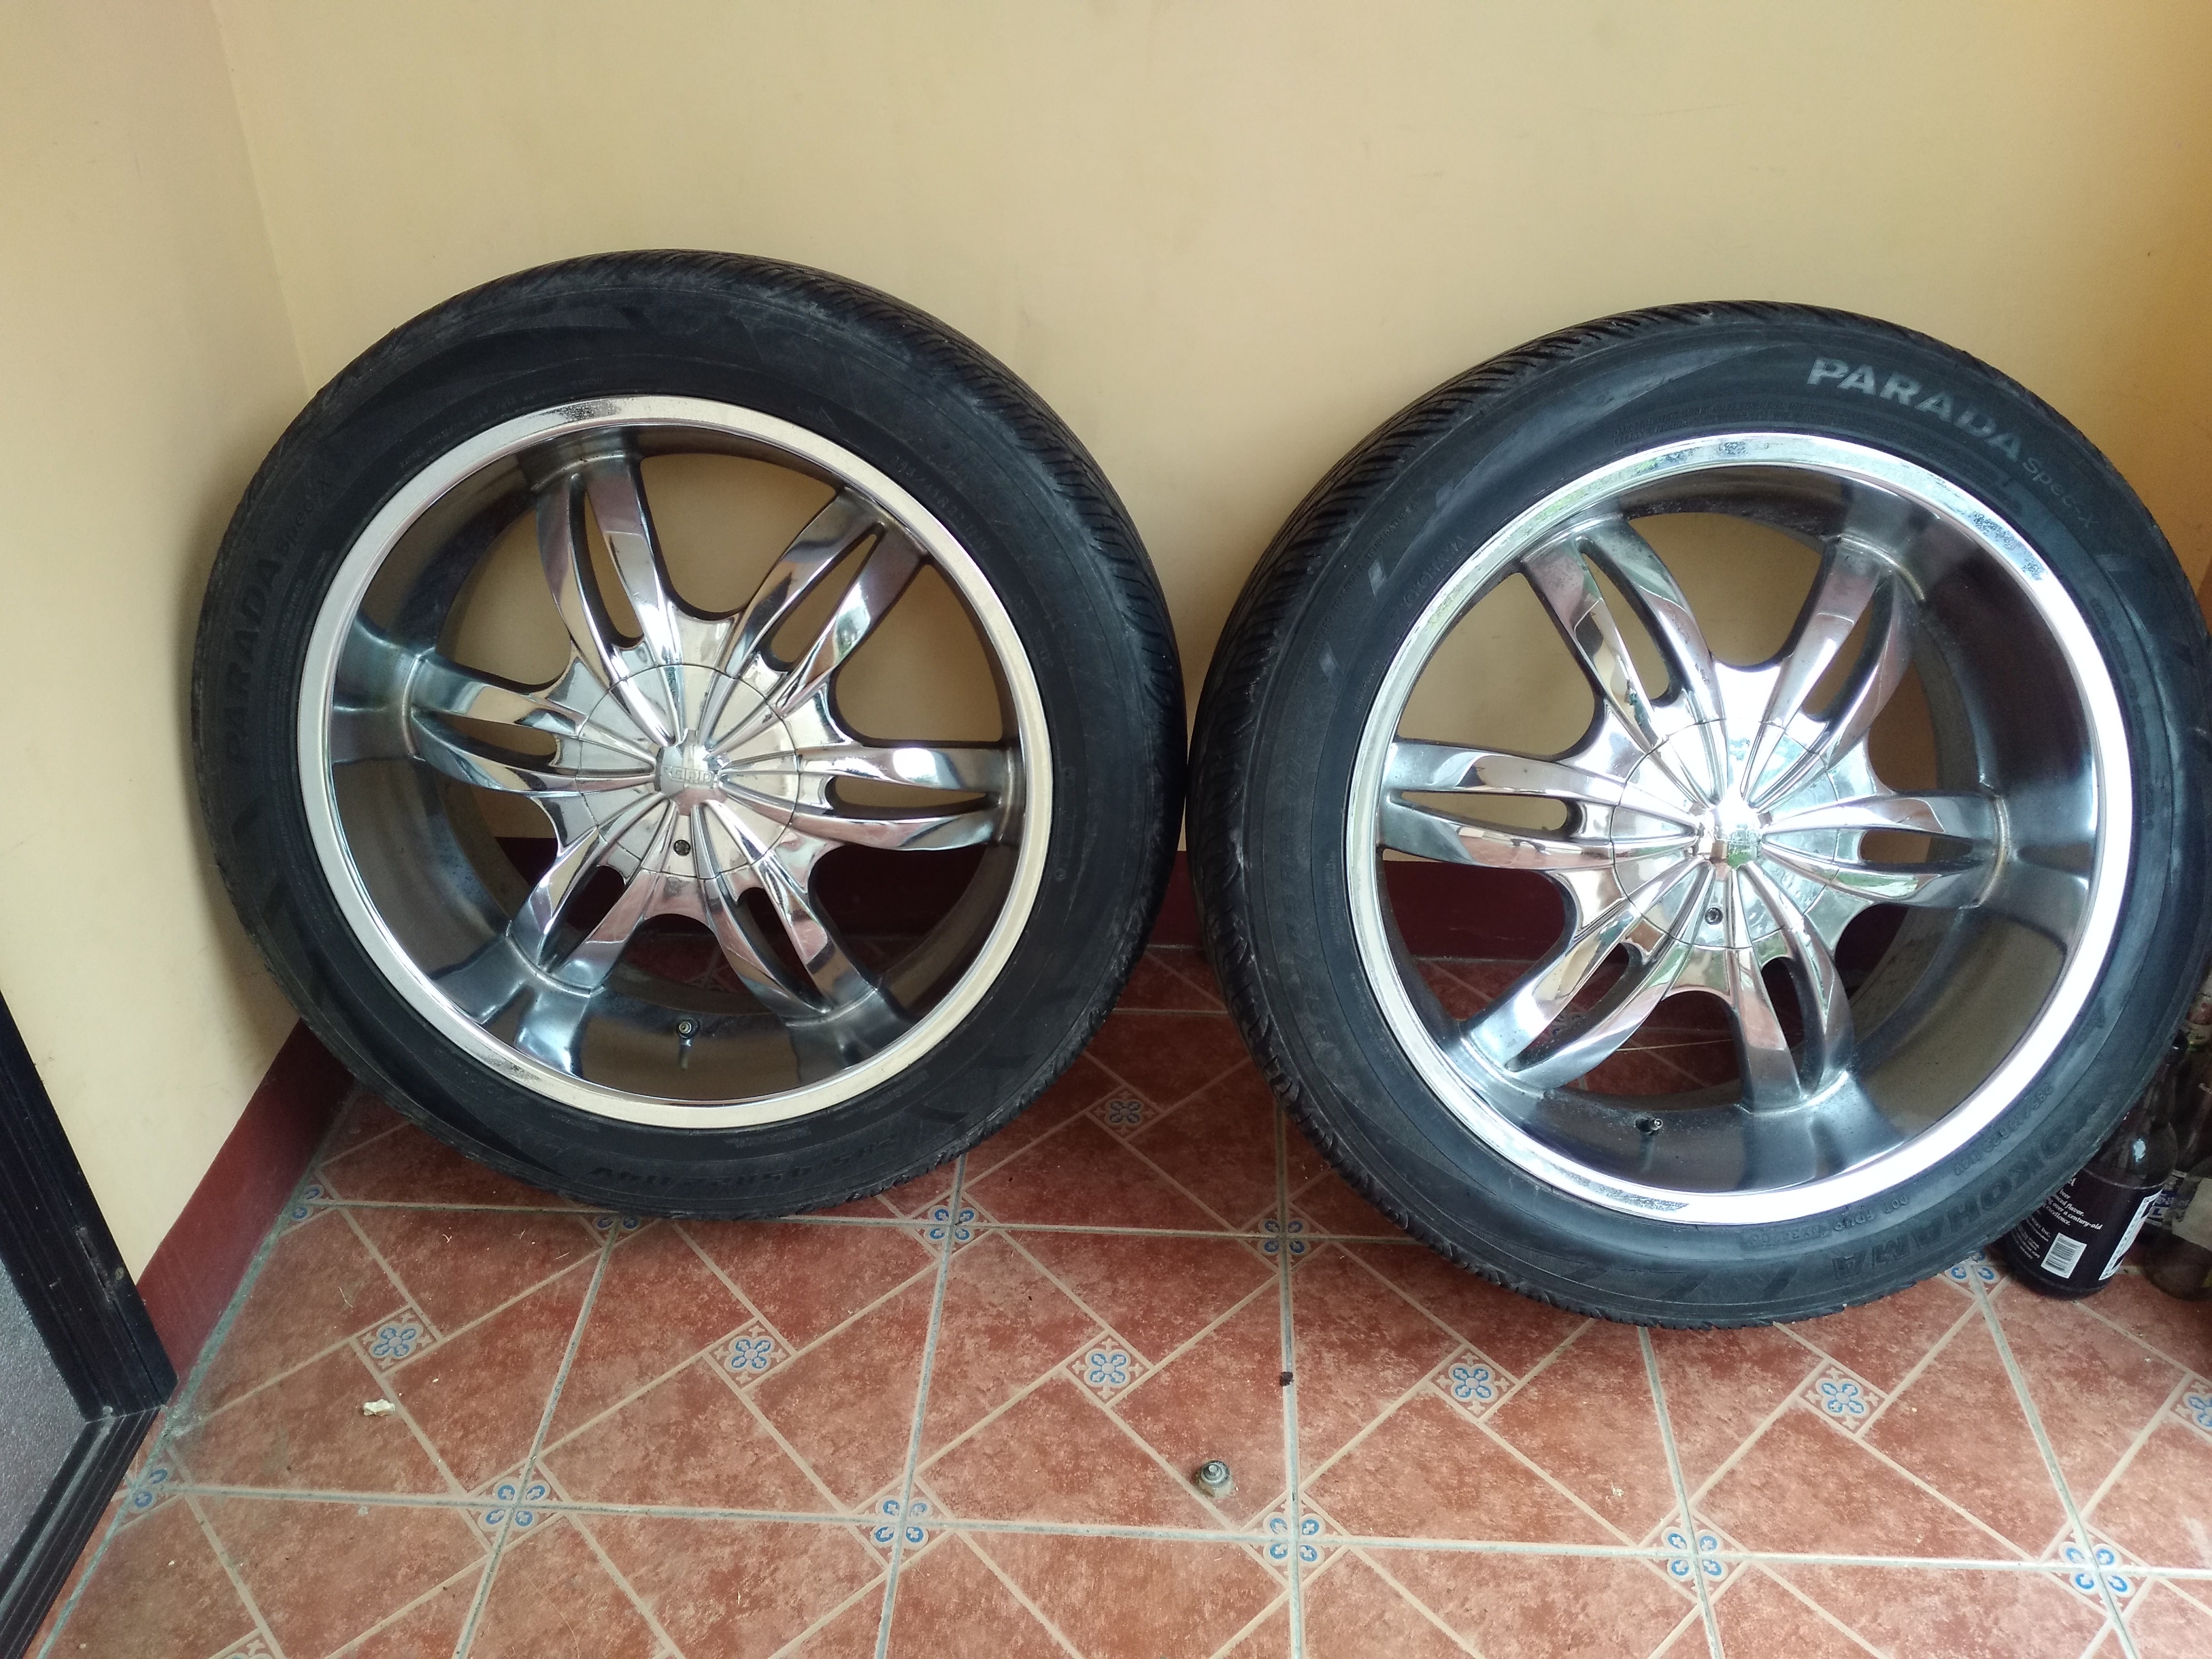 Four sets of Radd Alloy Car Mag Rims with low profile tires for Chevrolet Trailblazer and Chevrolet Colorado pick up. photo